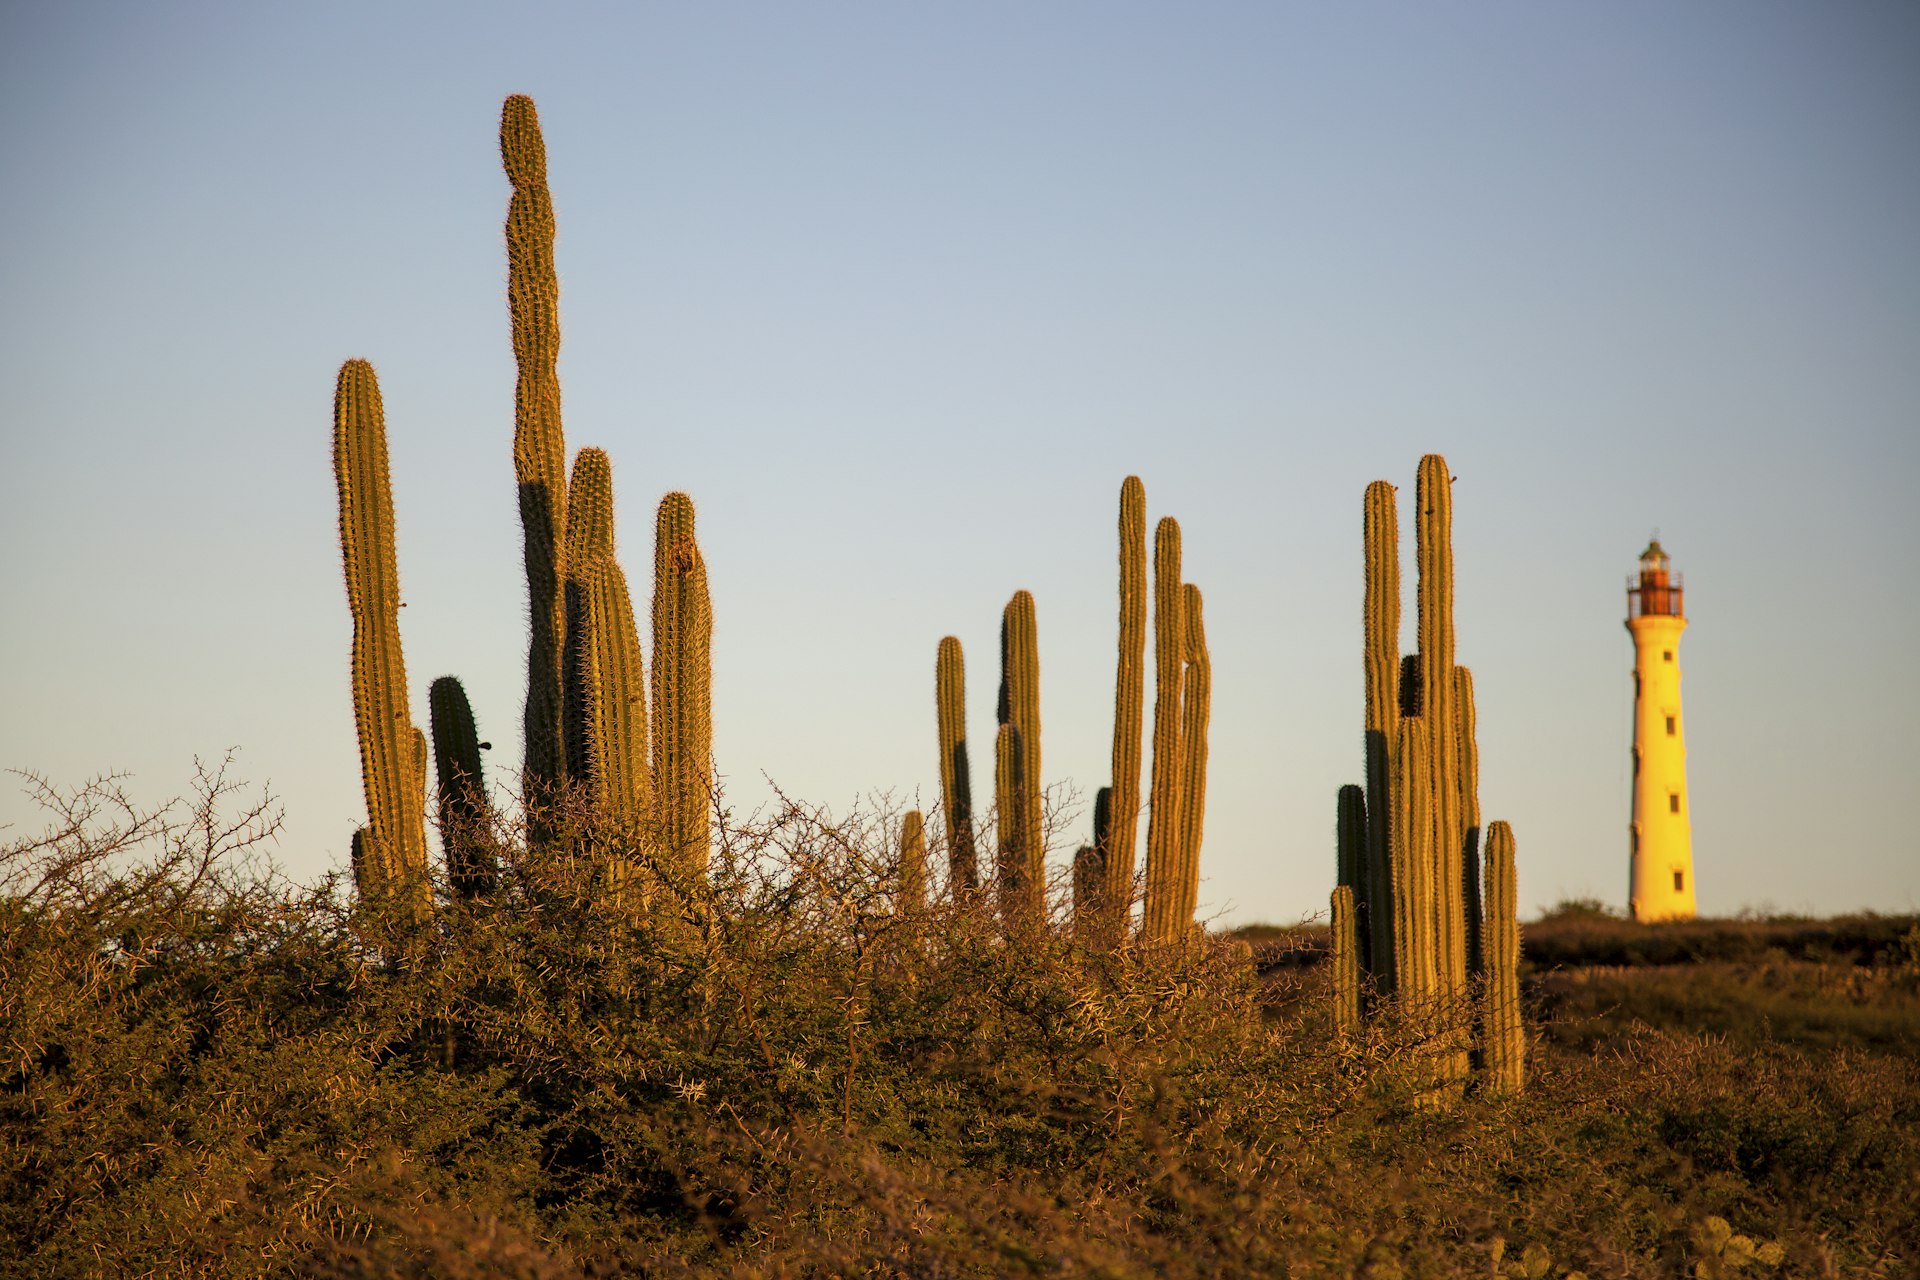 View of the California Lighthouse in the distance with cacti in the foreground in Aruba at sunset